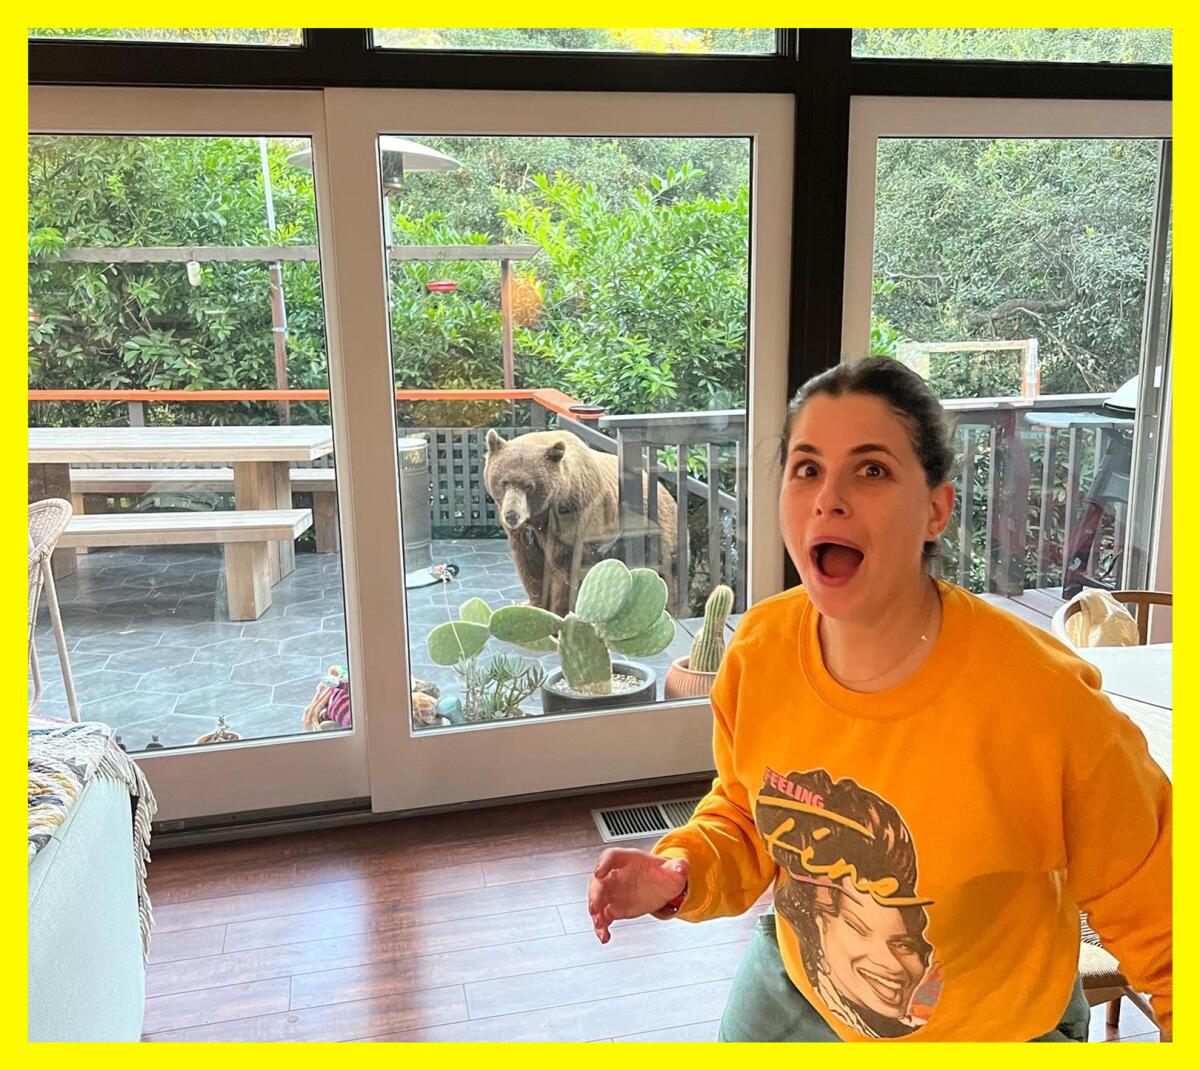 A woman in a living room, mouth agape, with a bear behind her outside a sliding glass door.